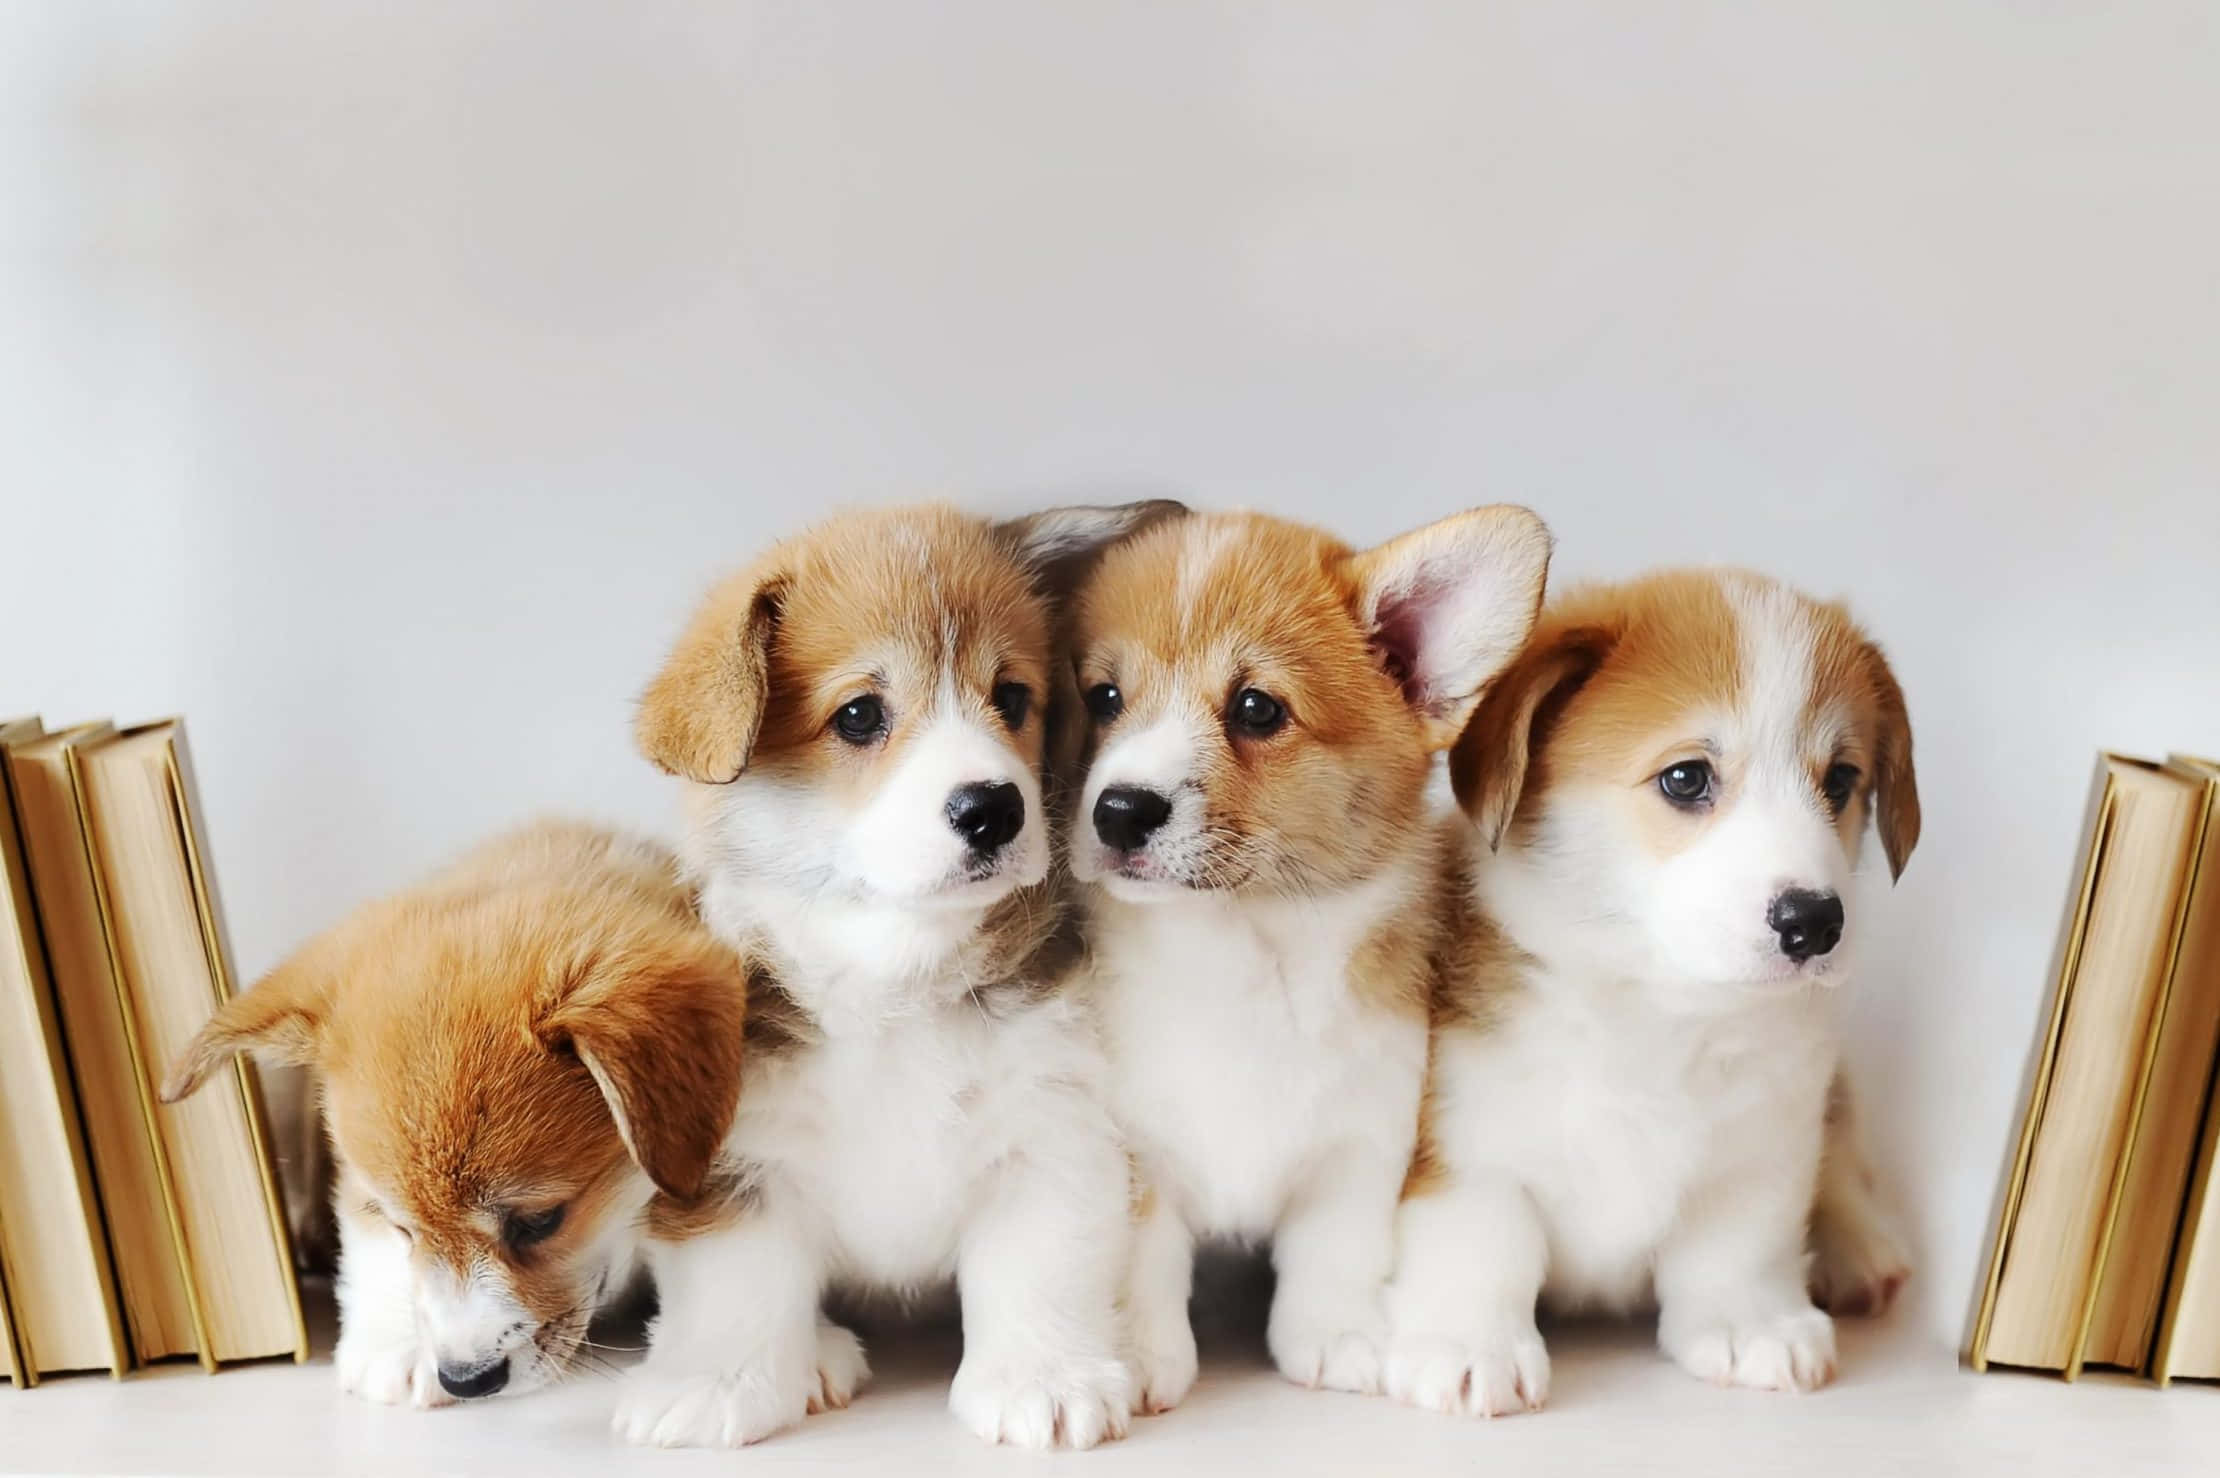 Four Small Puppies Sitting Next To Books